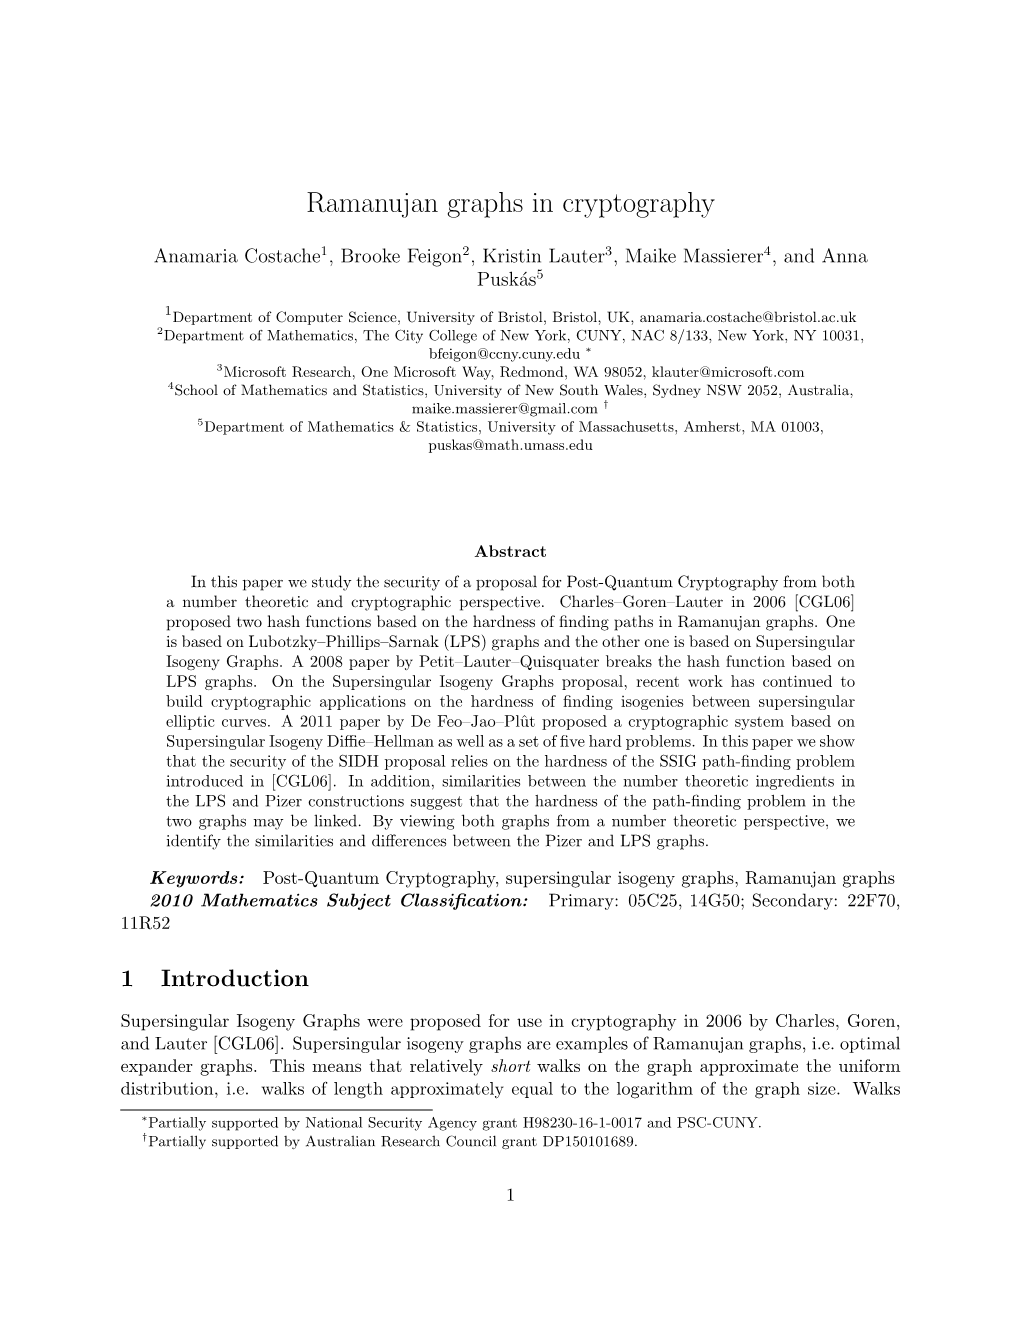 Ramanujan Graphs in Cryptography